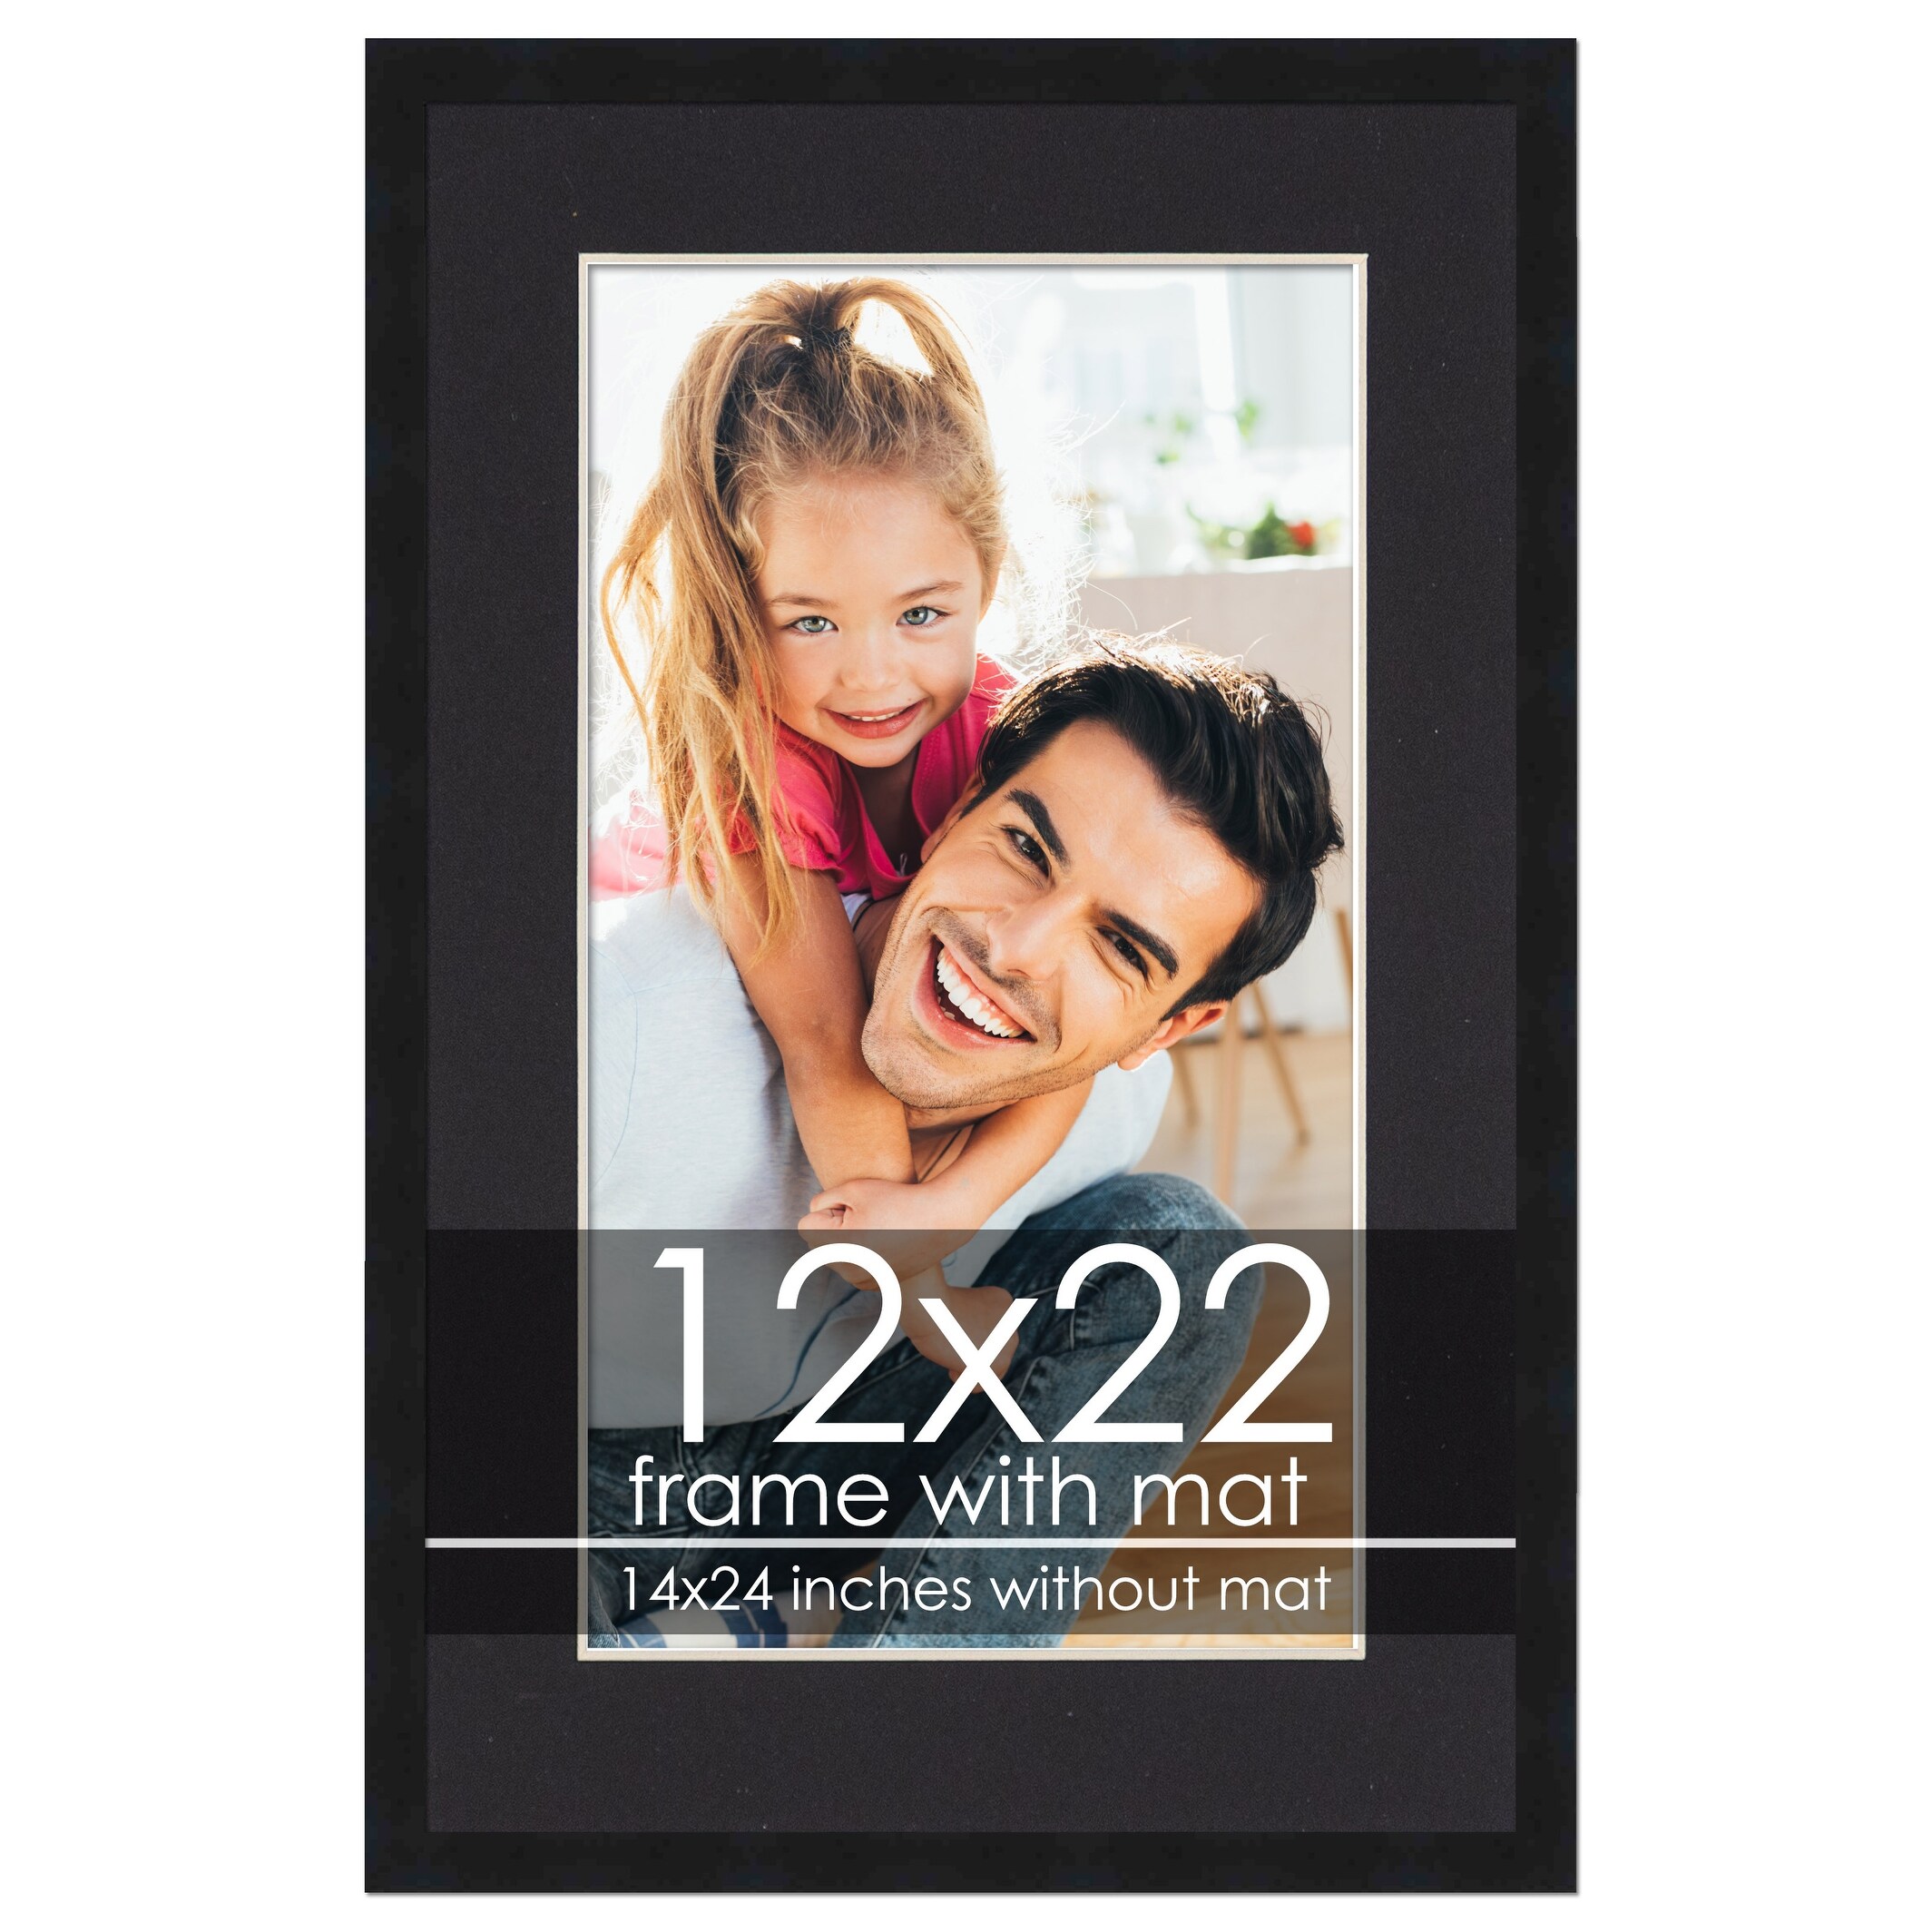 18x24 Frame with Mat - Black 22x28 Frame Wood Made to Display Print or  Poster Measuring 18 x 24 Inches with Black Photo Mat